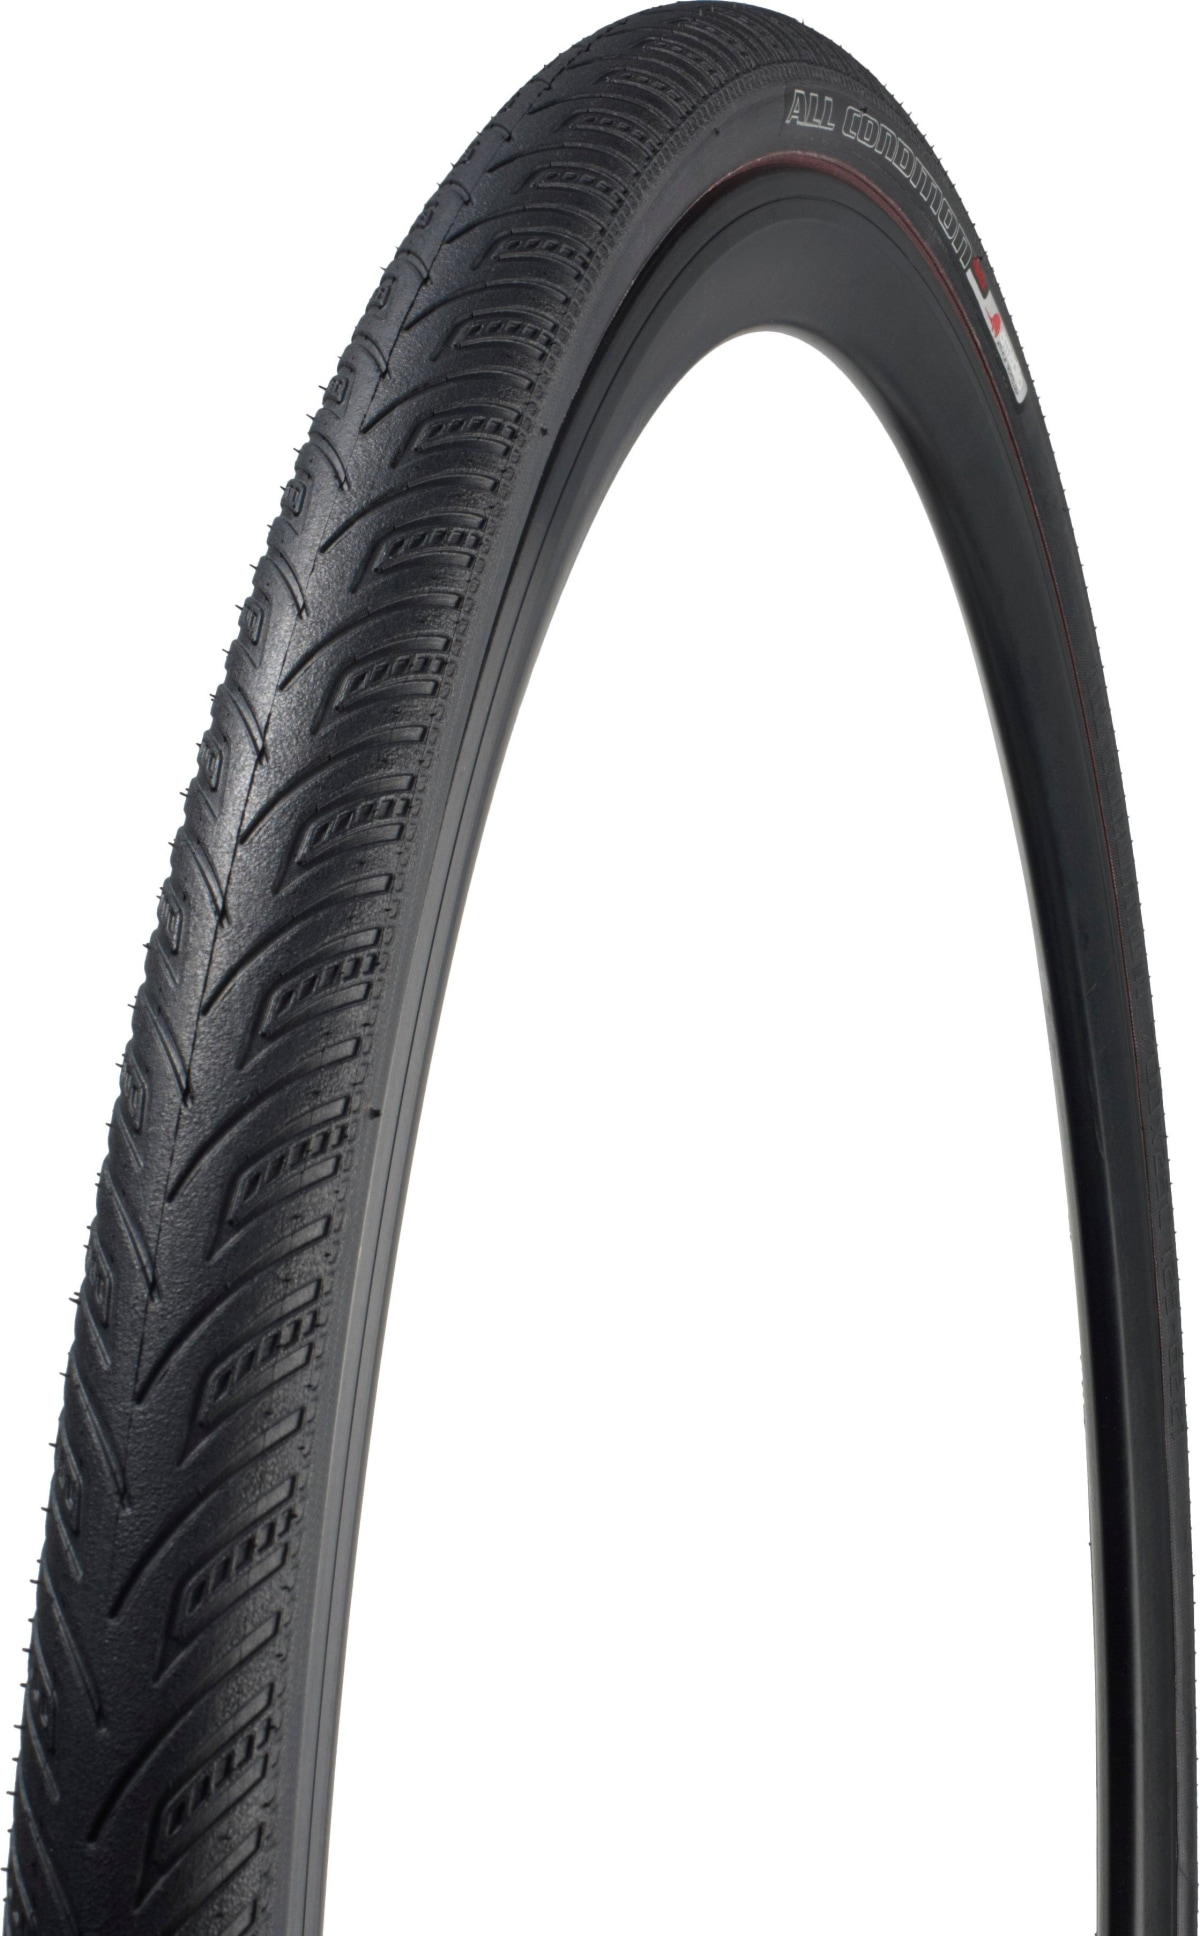 Specialized  All Condition Armadillo Road Tyres 700 X 23 Black